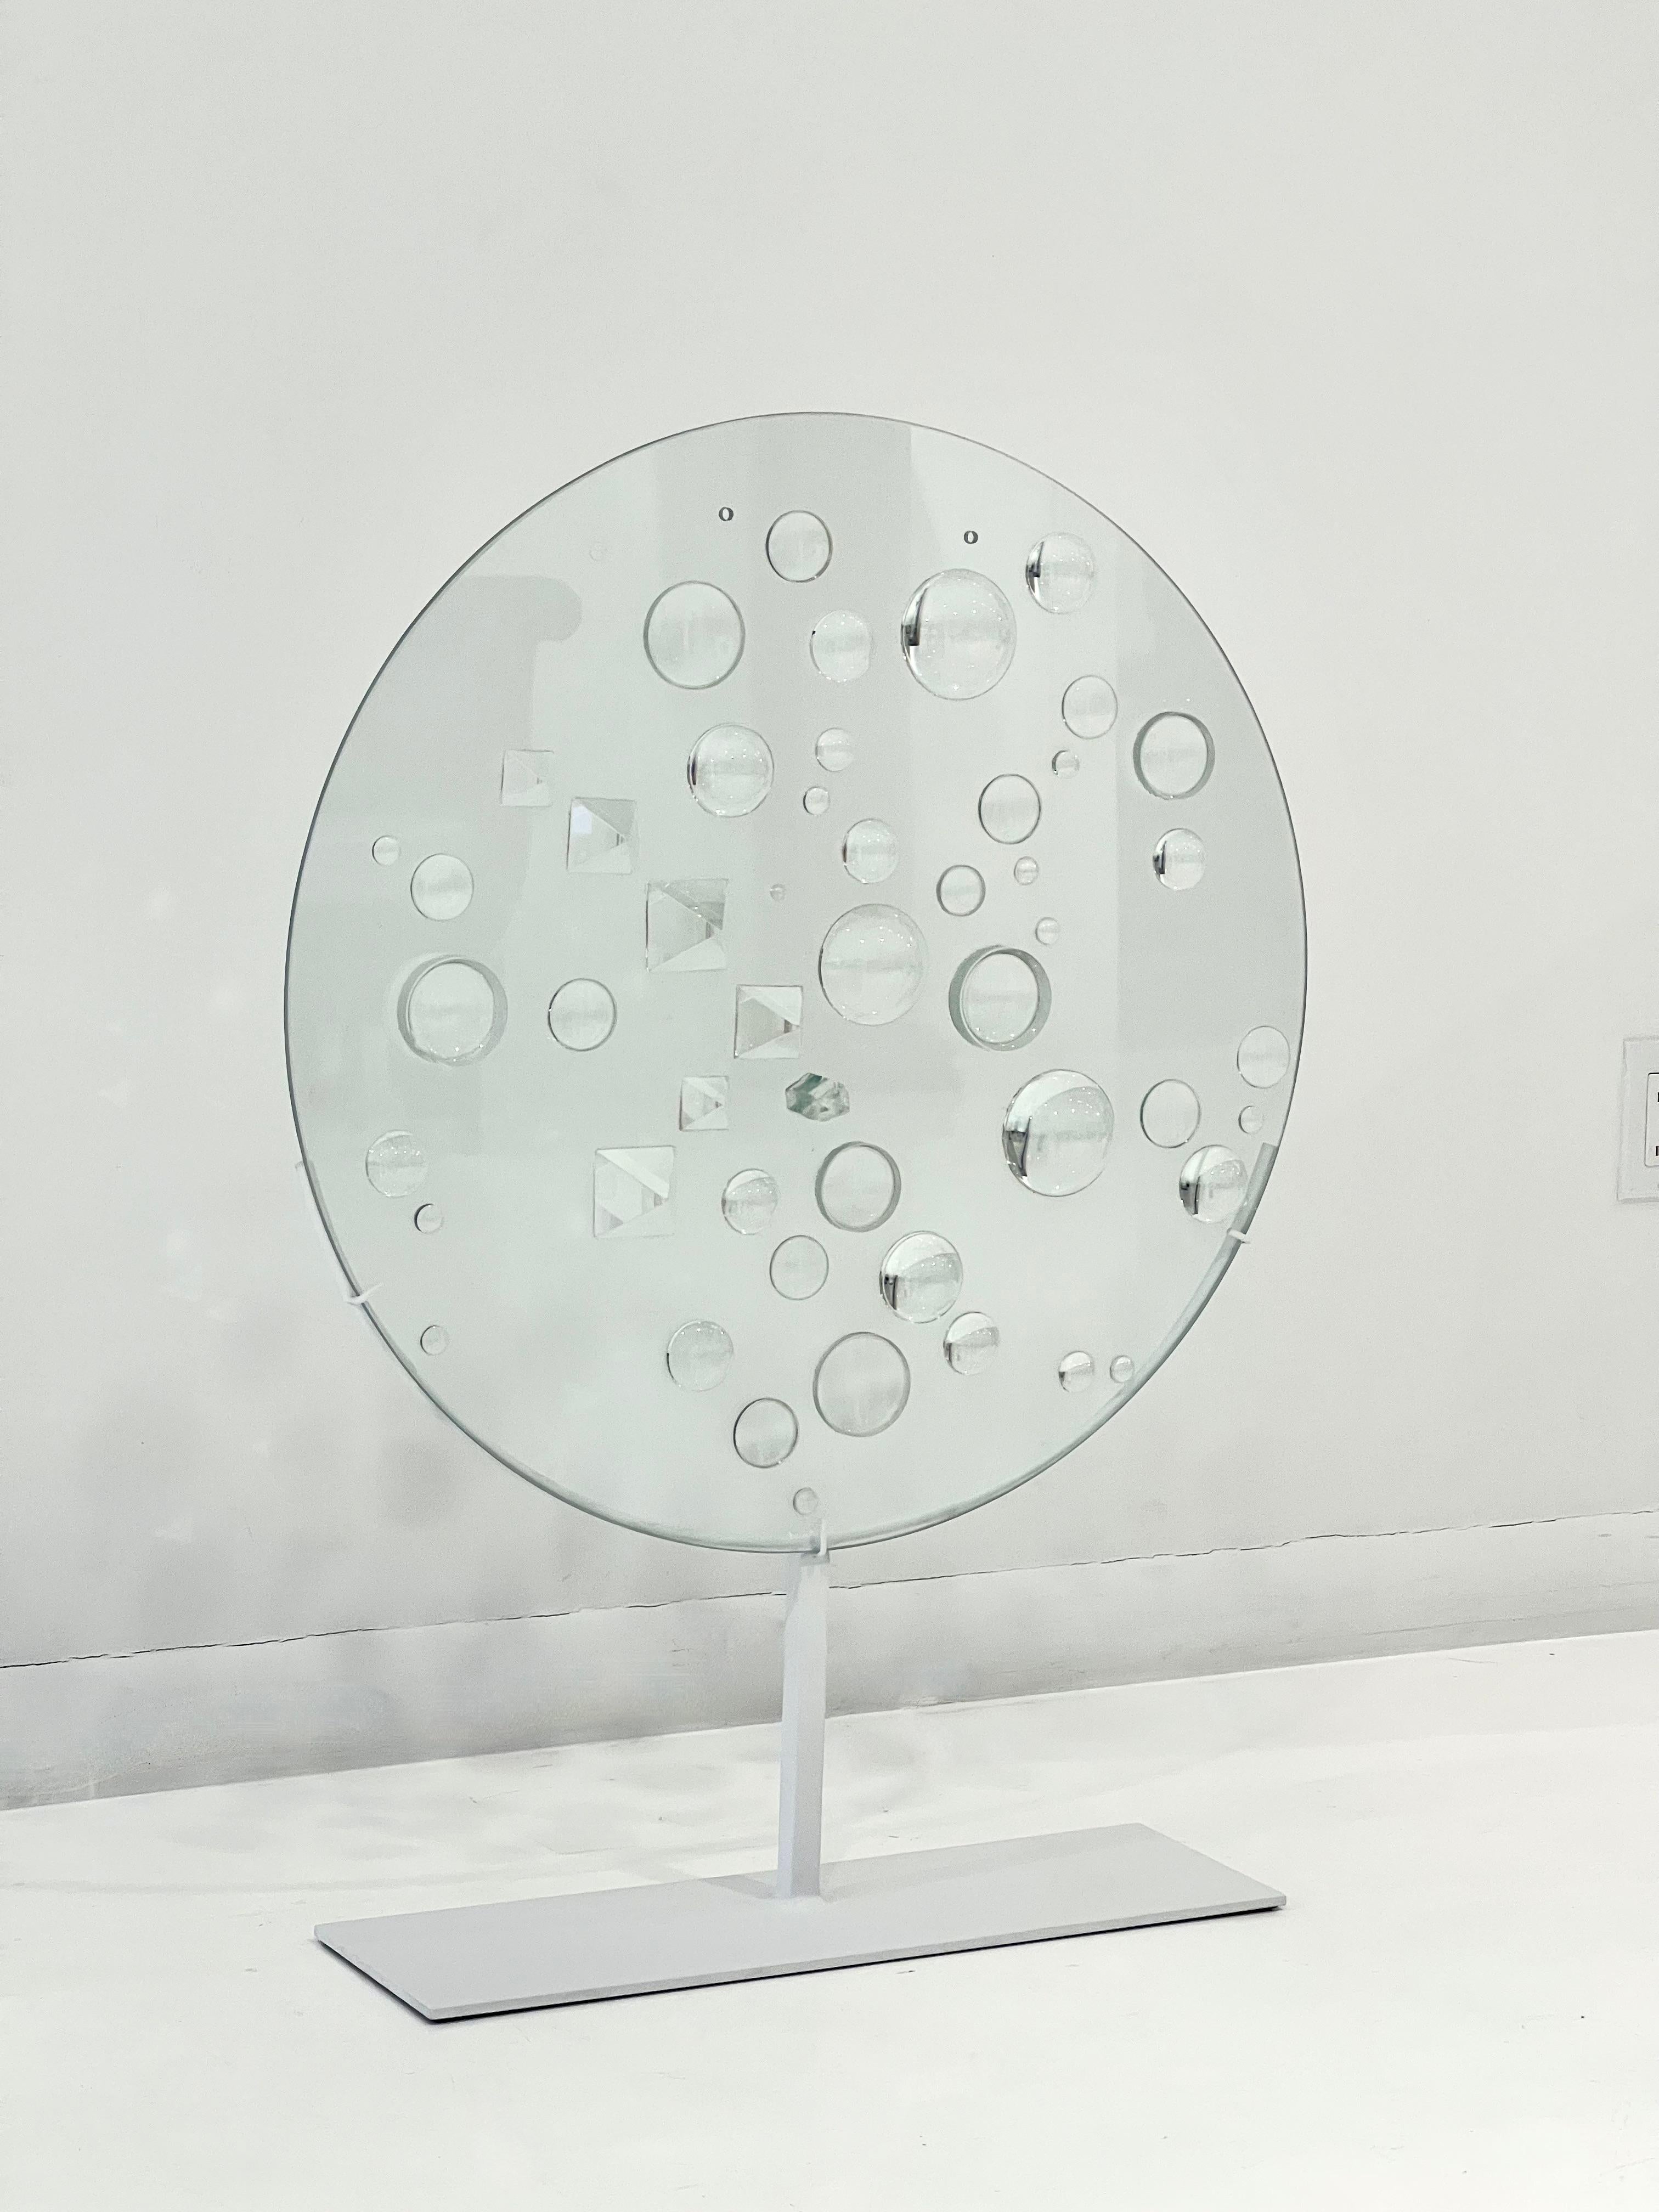 Optical Glass Disc Sculpture by May Hilde Ruth Bauermeister, USA, circa 1960's. Glass disc on metal stand with a variety of scaled lenses, both convex and concave, refracting and reflecting the collected light. Mary Bauermeister's work is